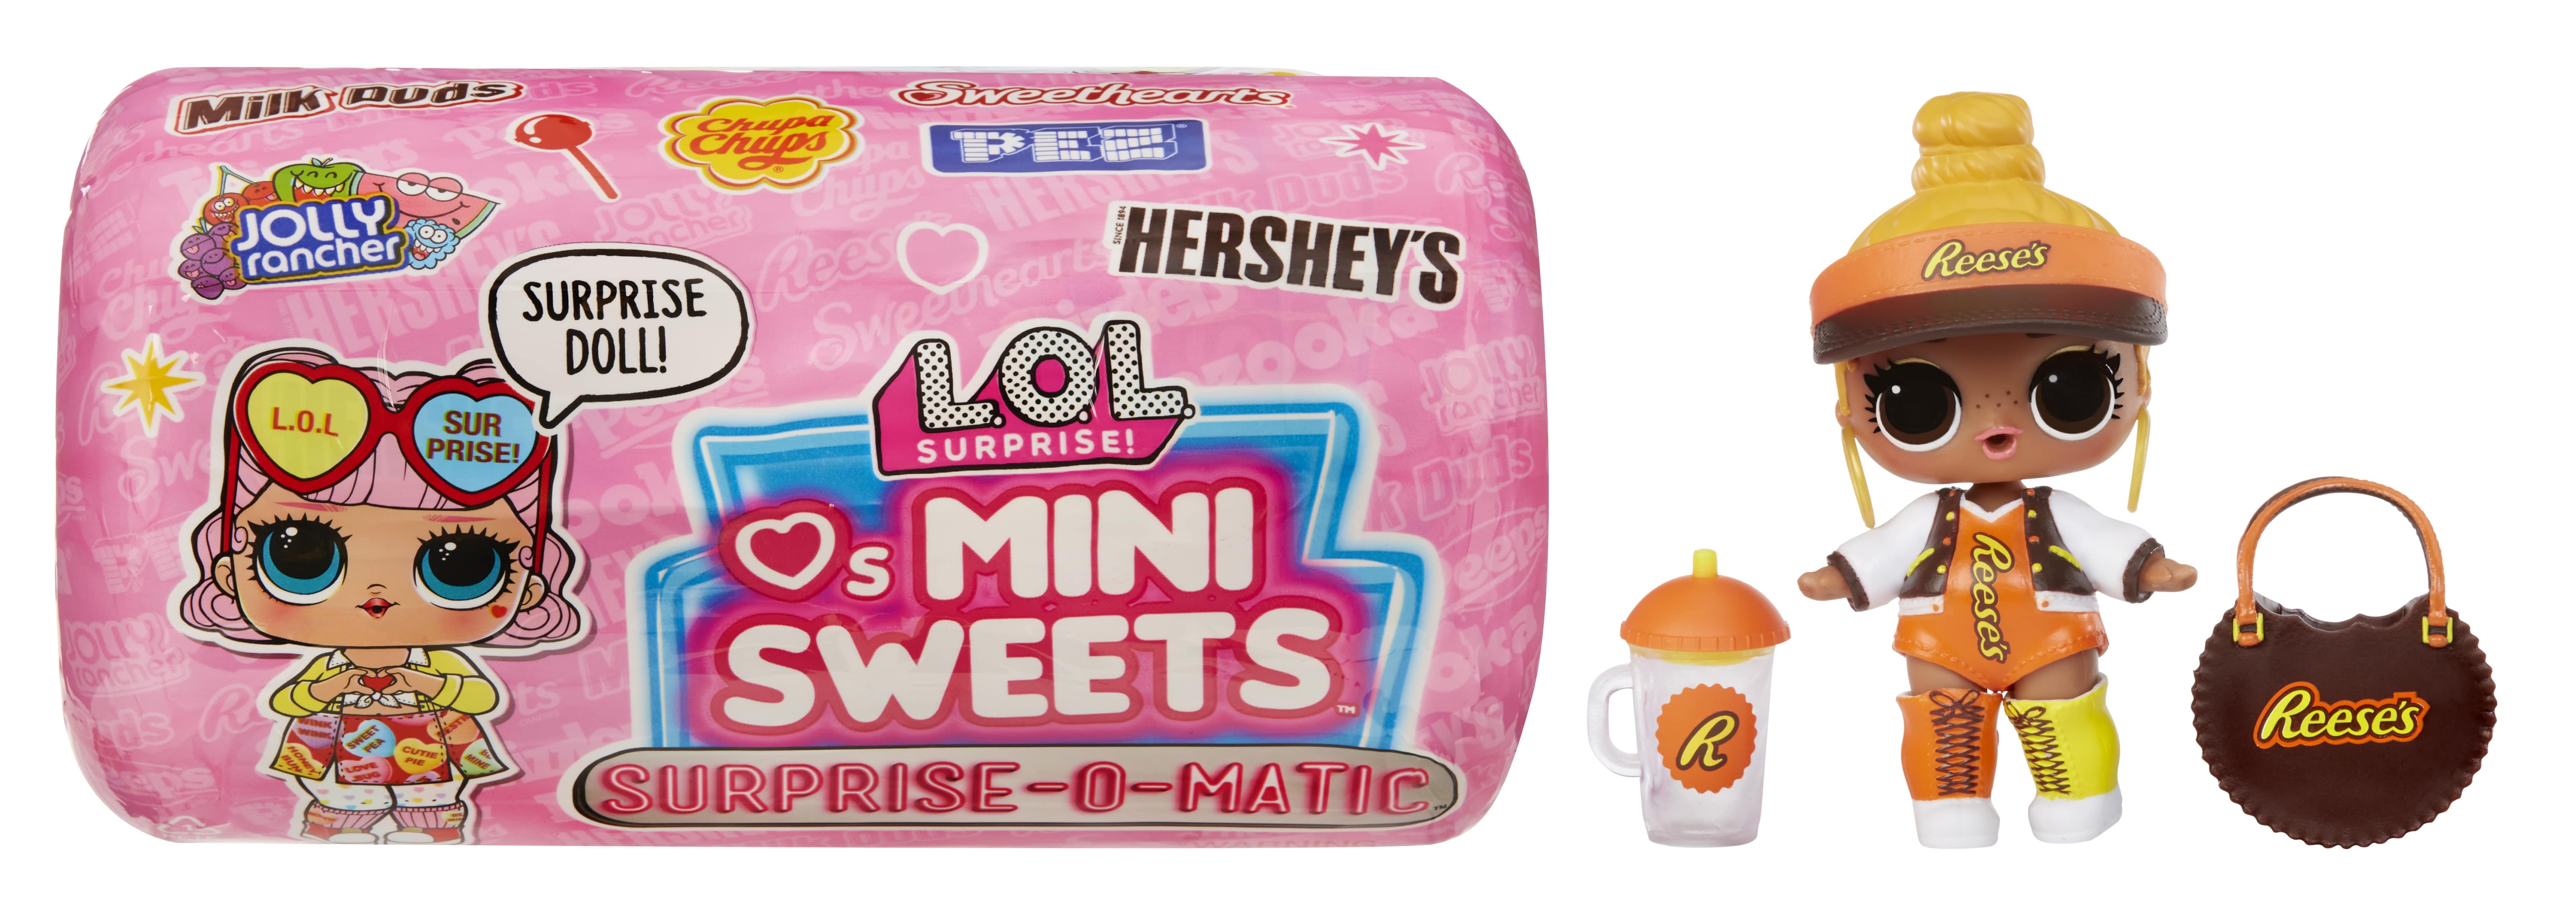 L.O.L Surprise! LOL Surprise Loves Mini Sweets Surprise-O-Matic™ Dolls with 9 Surprises, Candy Theme, Accessories, Collectible Doll, Vending Machine Packaging